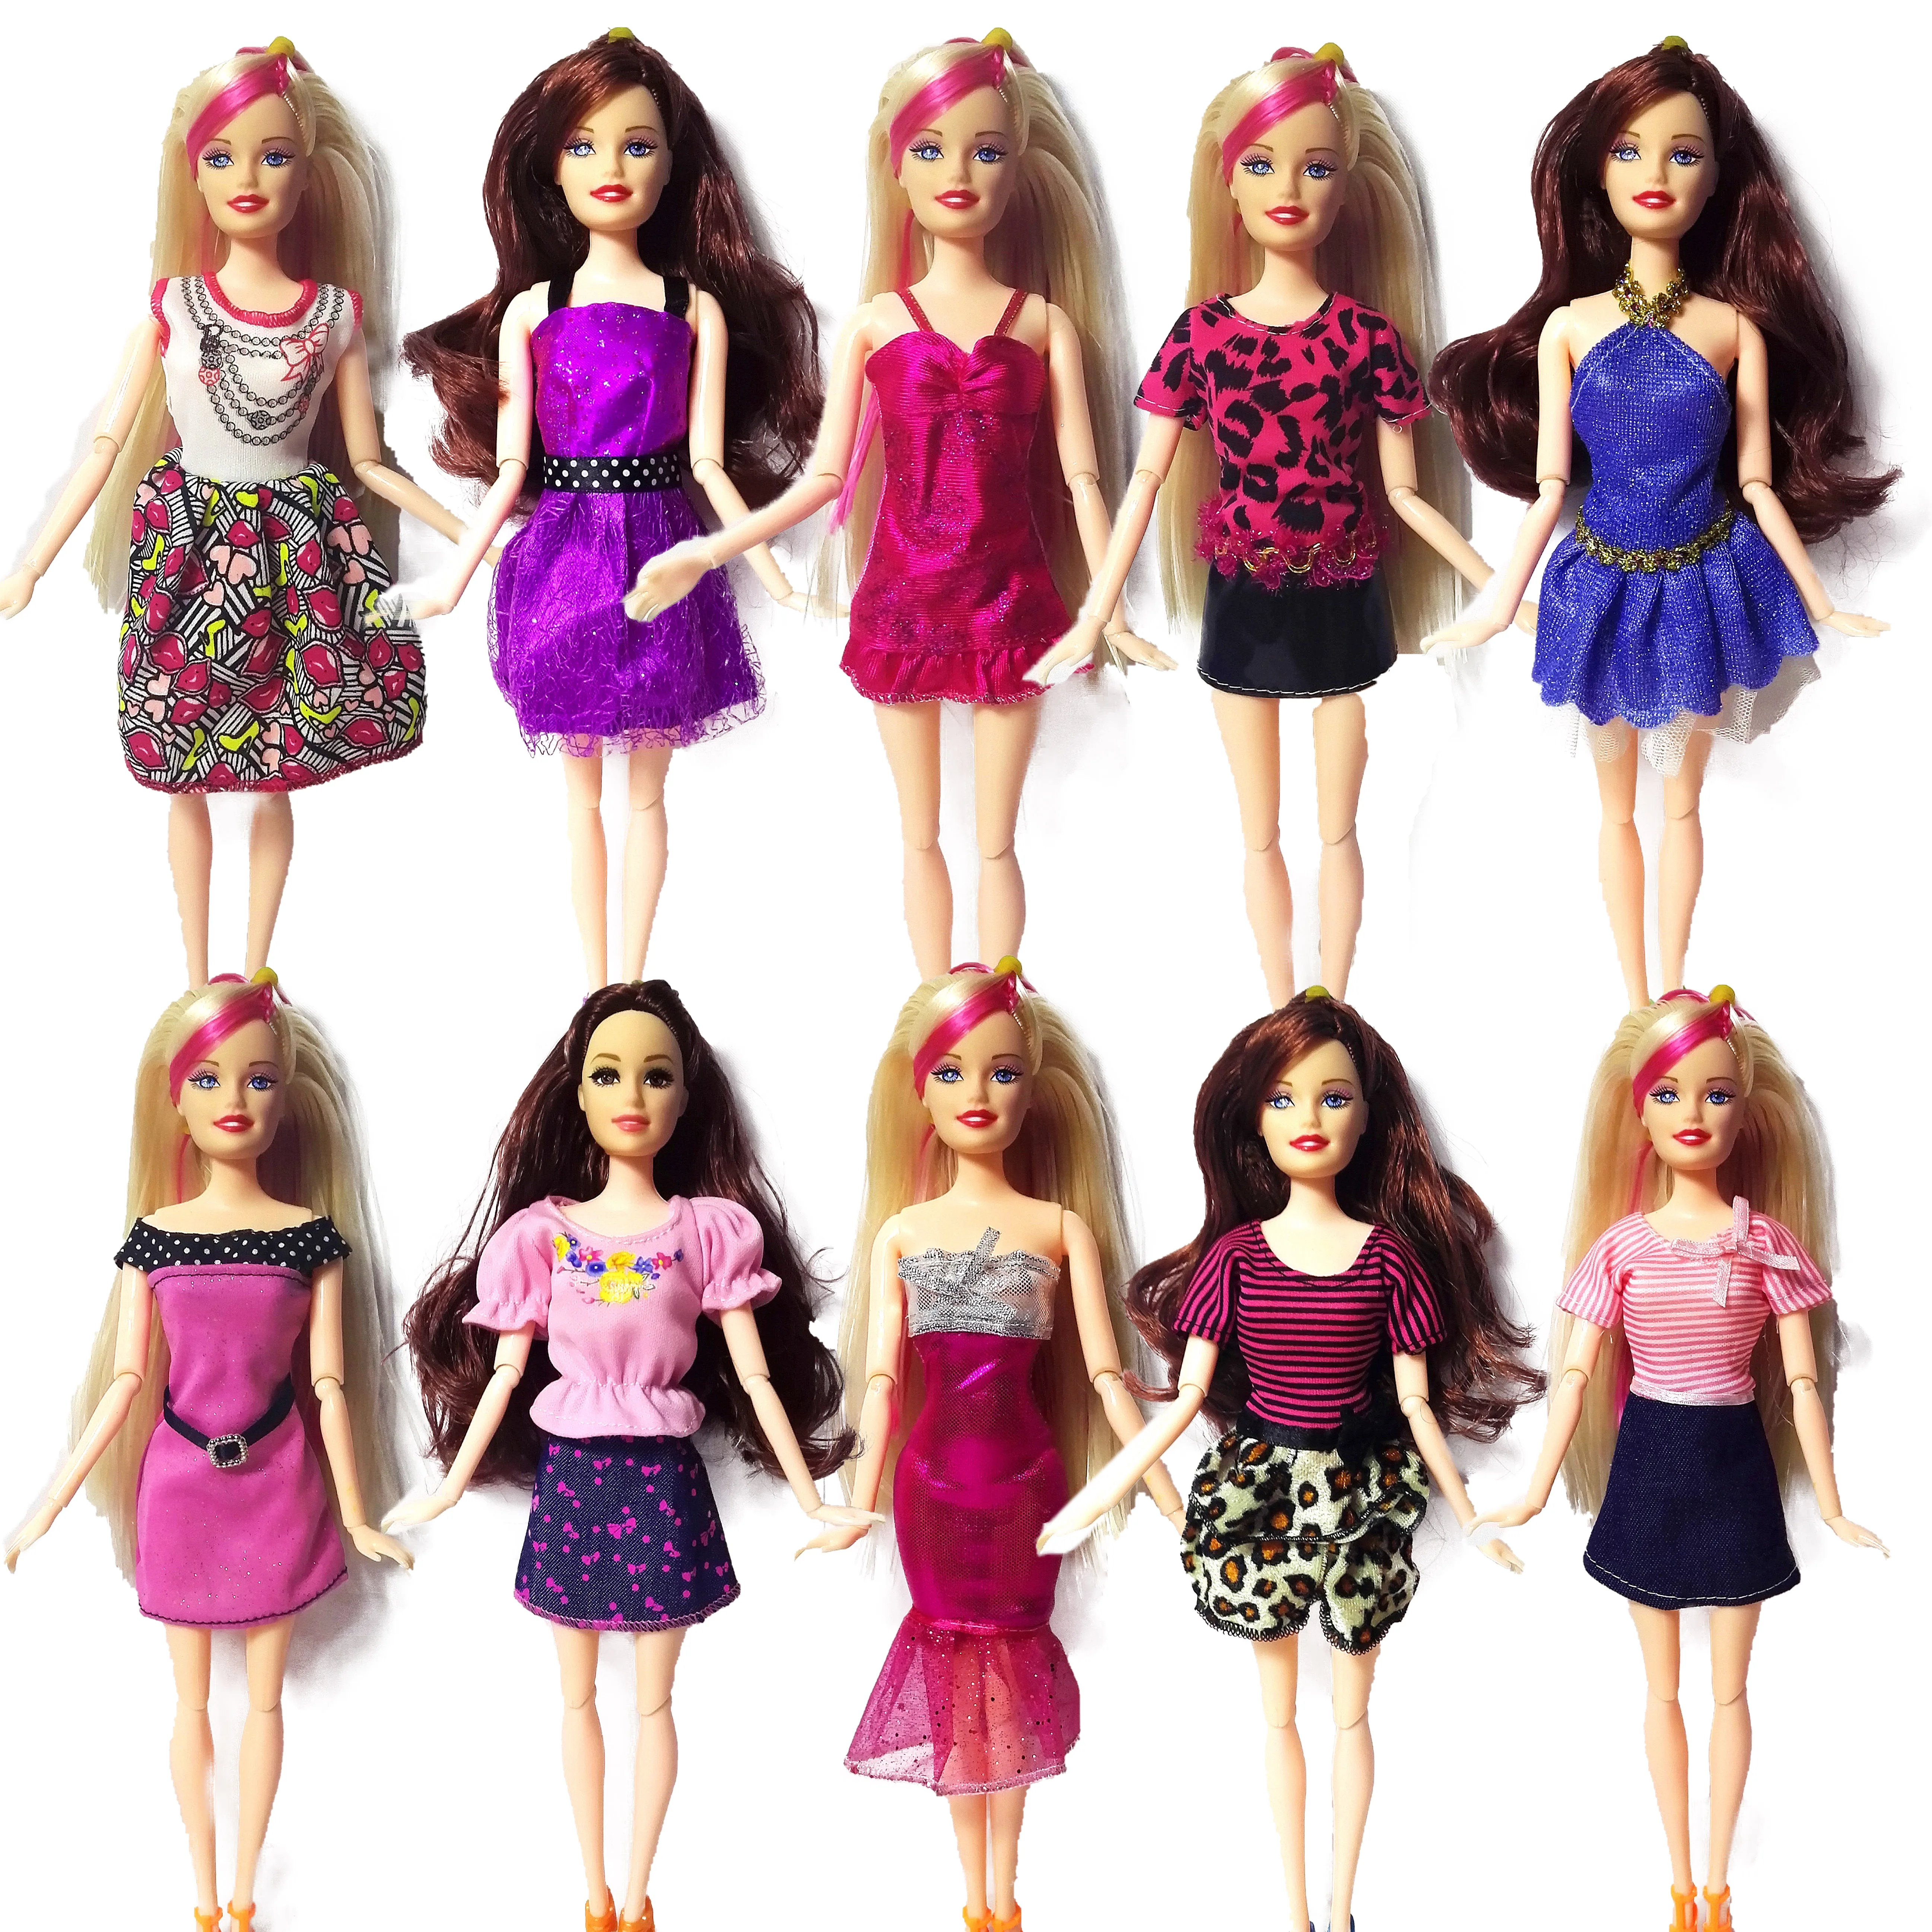 Handmade Party DRESSES-clothes for Barbie doll NEW 